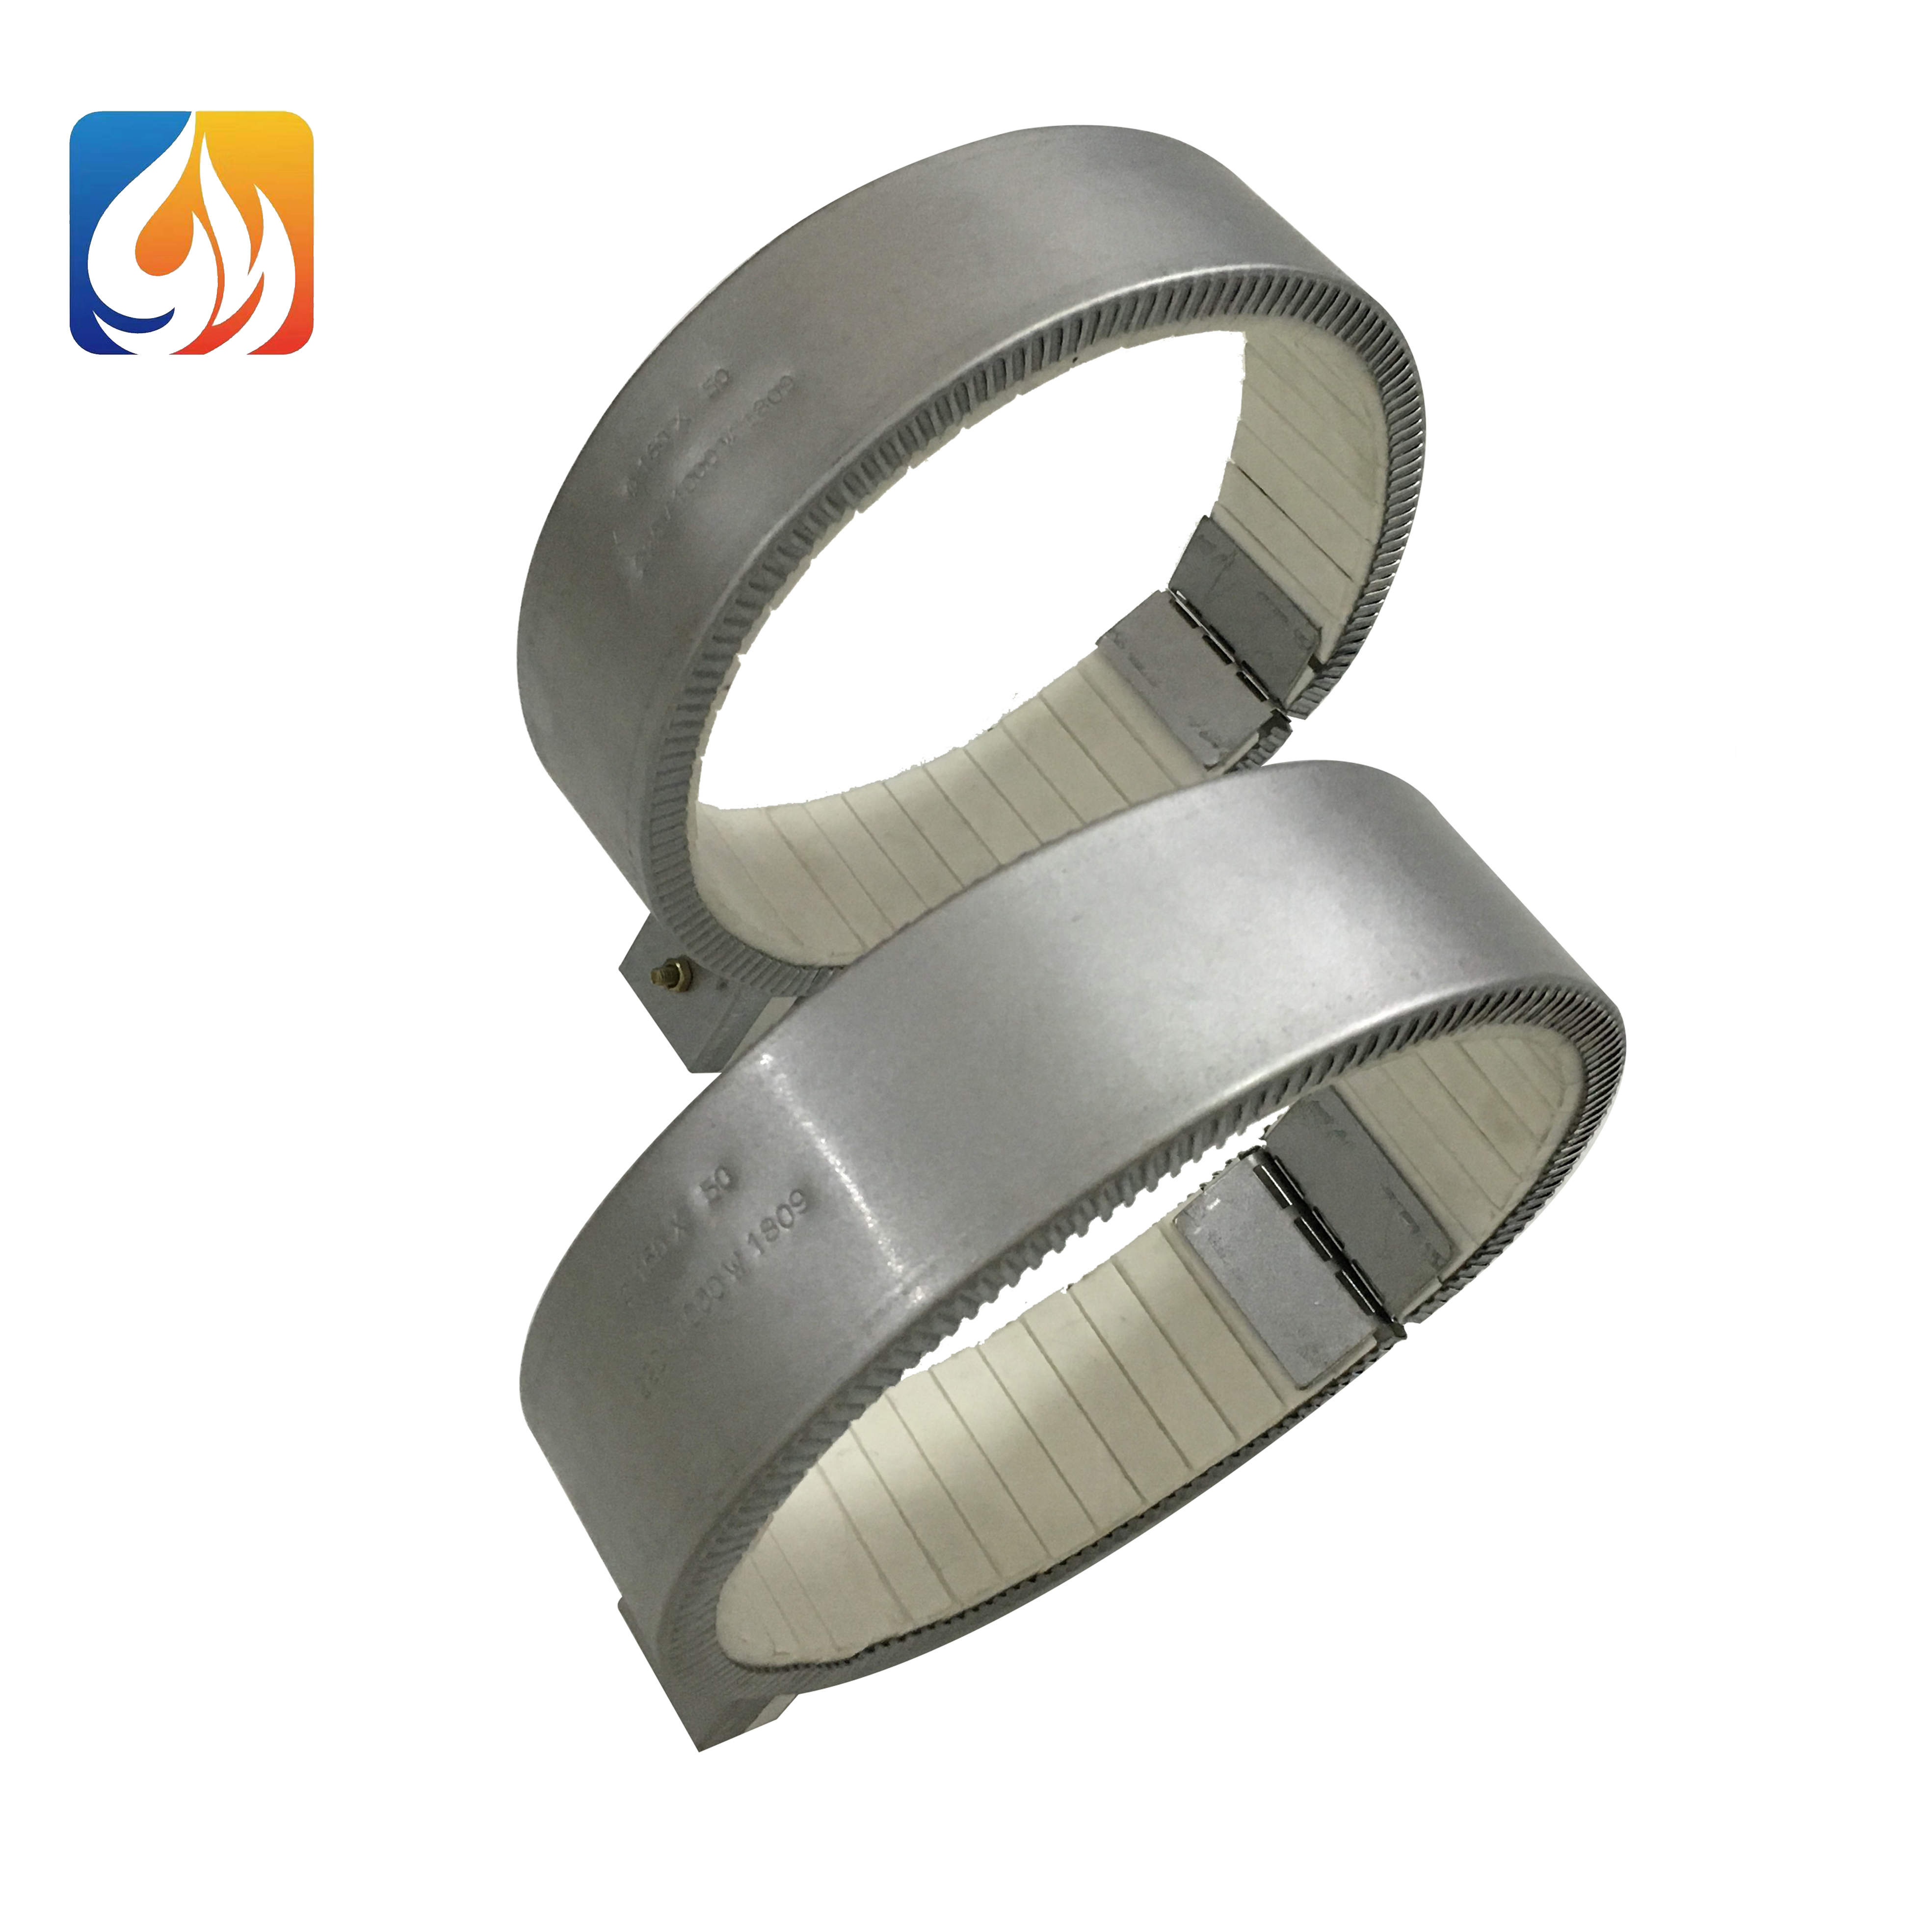 Ceramic band heater for packaging equipment